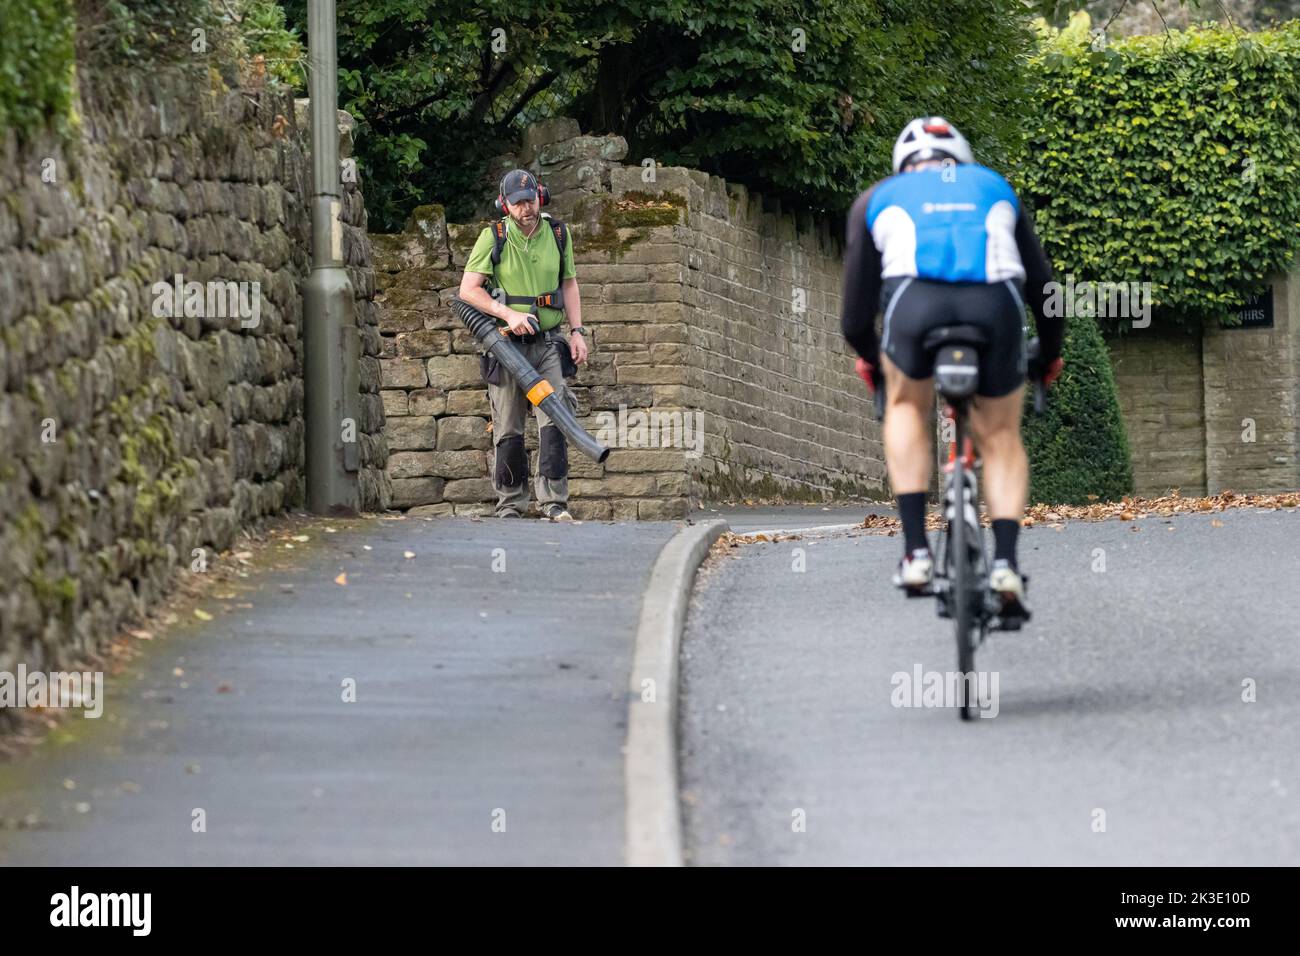 Man using a hand-held leaf blower to blow leaves off the back and out of the way of a cyclist approaching, UK Stock Photo